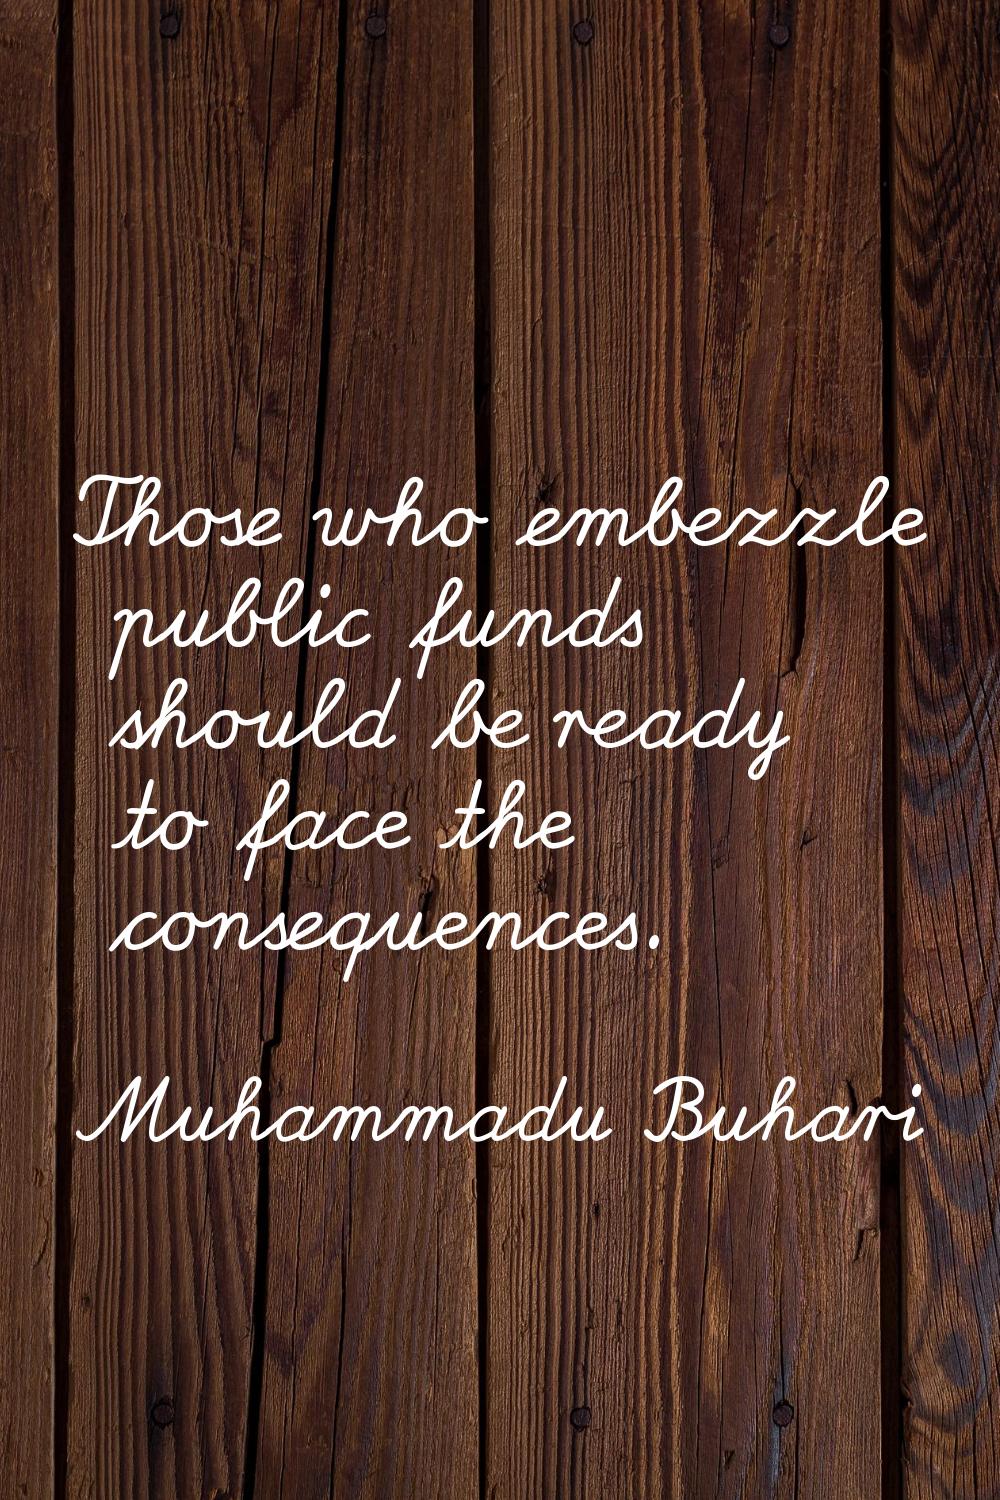 Those who embezzle public funds should be ready to face the consequences.